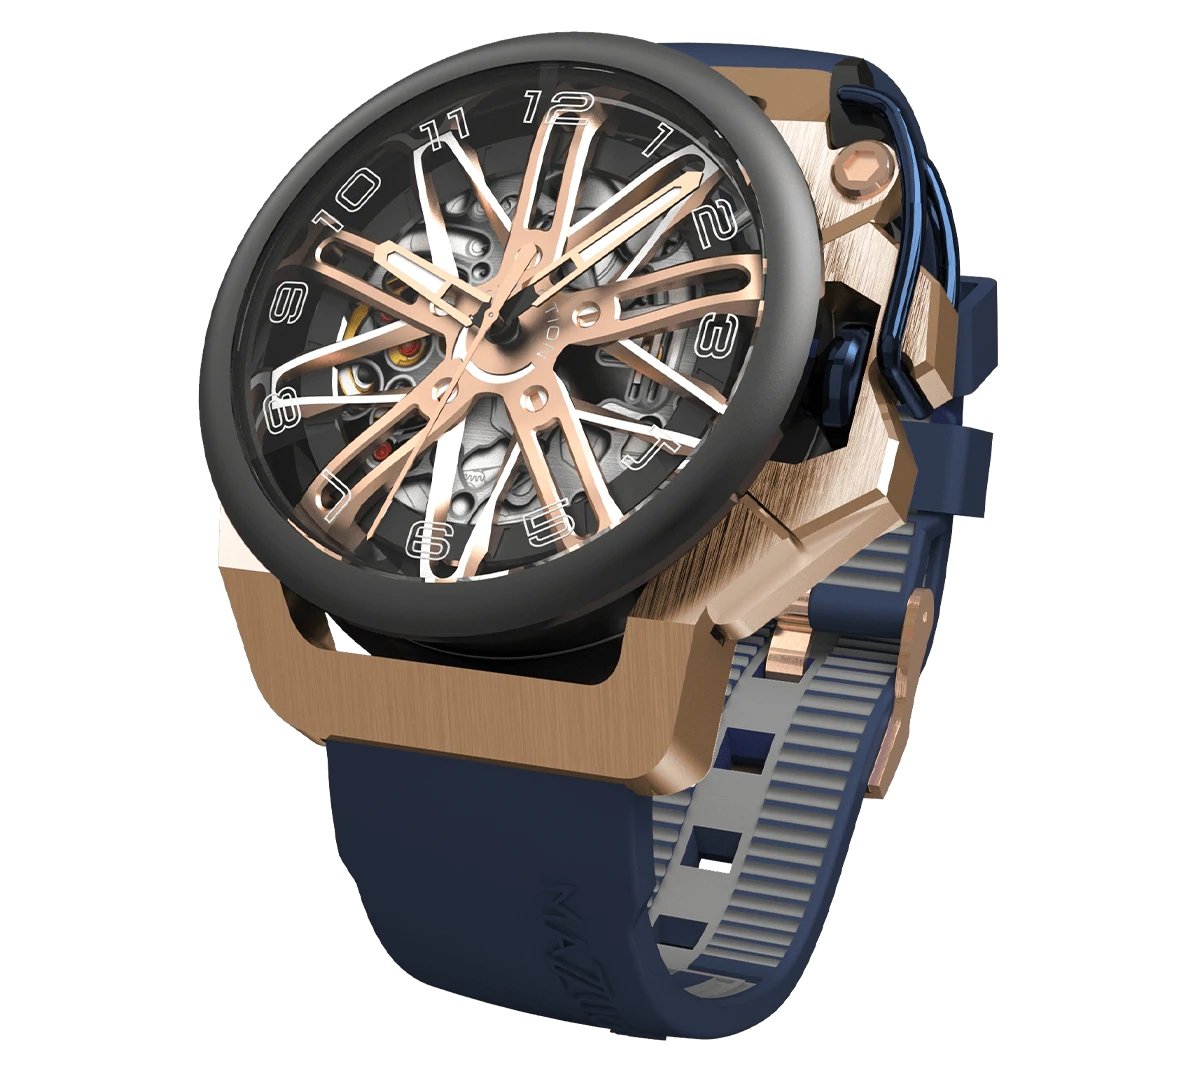 Mazzucato RIM GT Men's Chronograph Watch Blue GT5-RG - Watches & Crystals